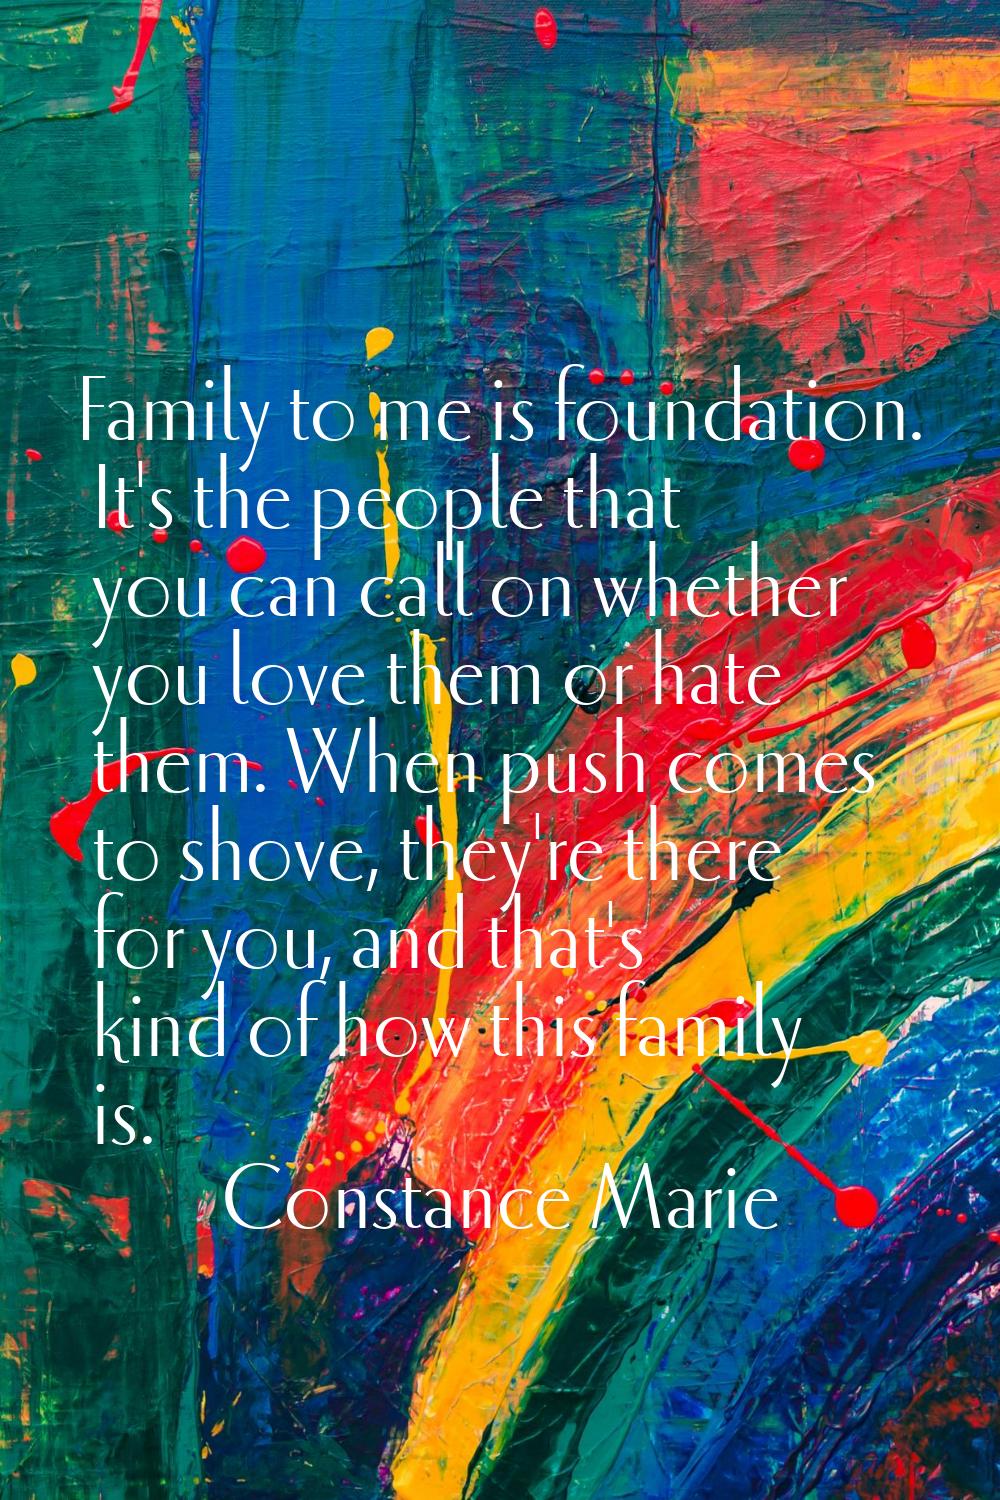 Family to me is foundation. It's the people that you can call on whether you love them or hate them